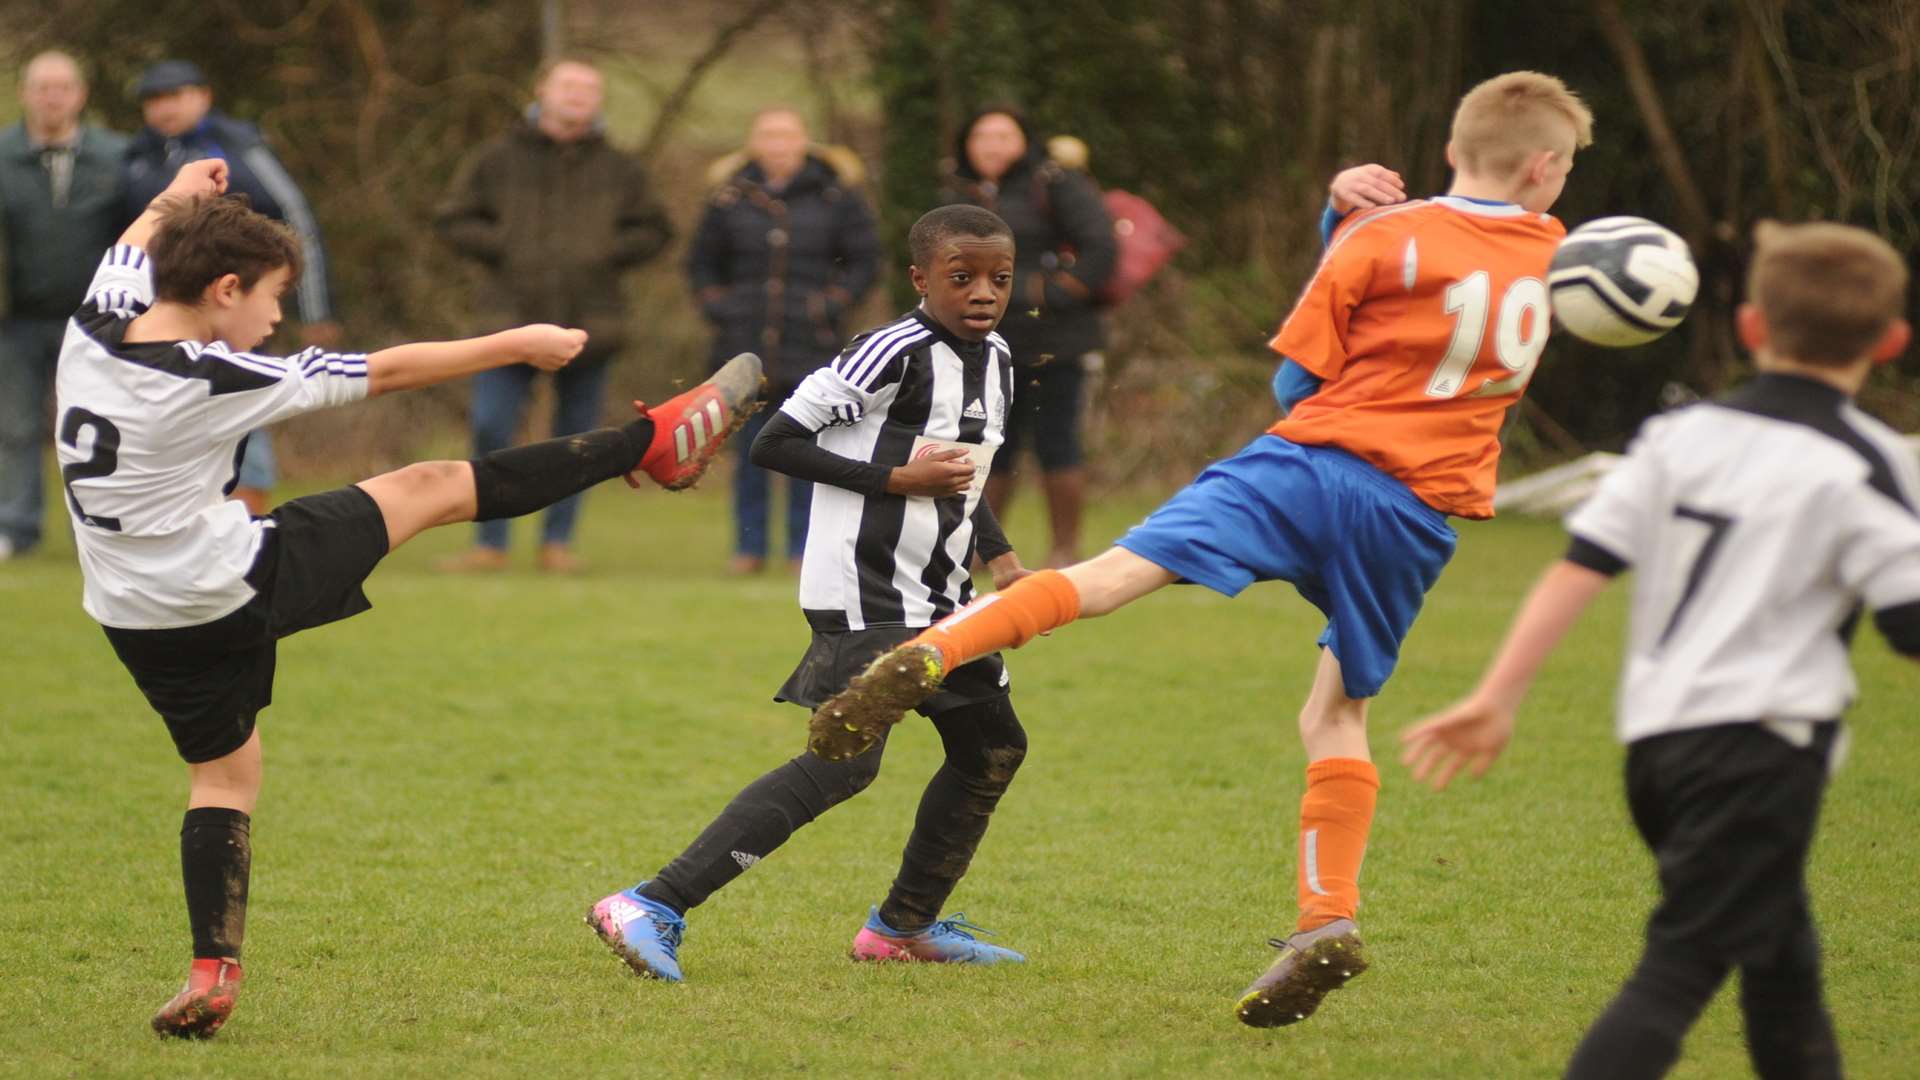 Cuxton 91 Mavericks and Real 60 Lions do battle in the Under-11 Trophy Picture: Steve Crispe